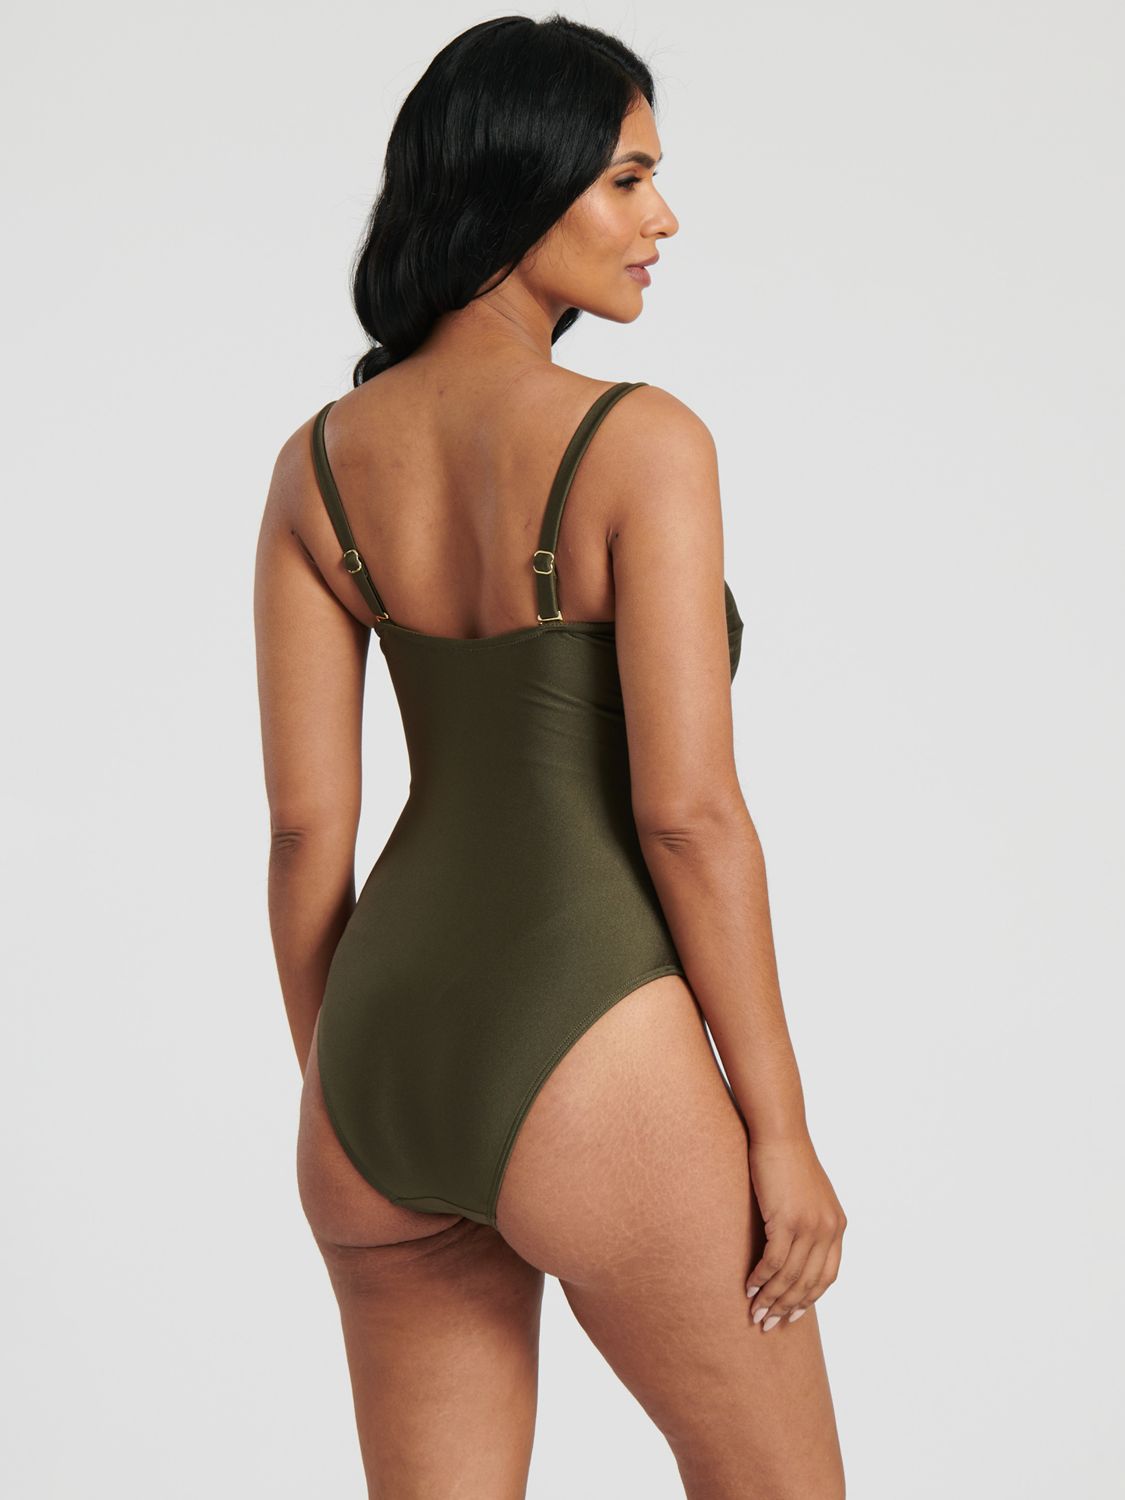 South Beach Bandeau Tummy Control Swimsuit, Olive, 8